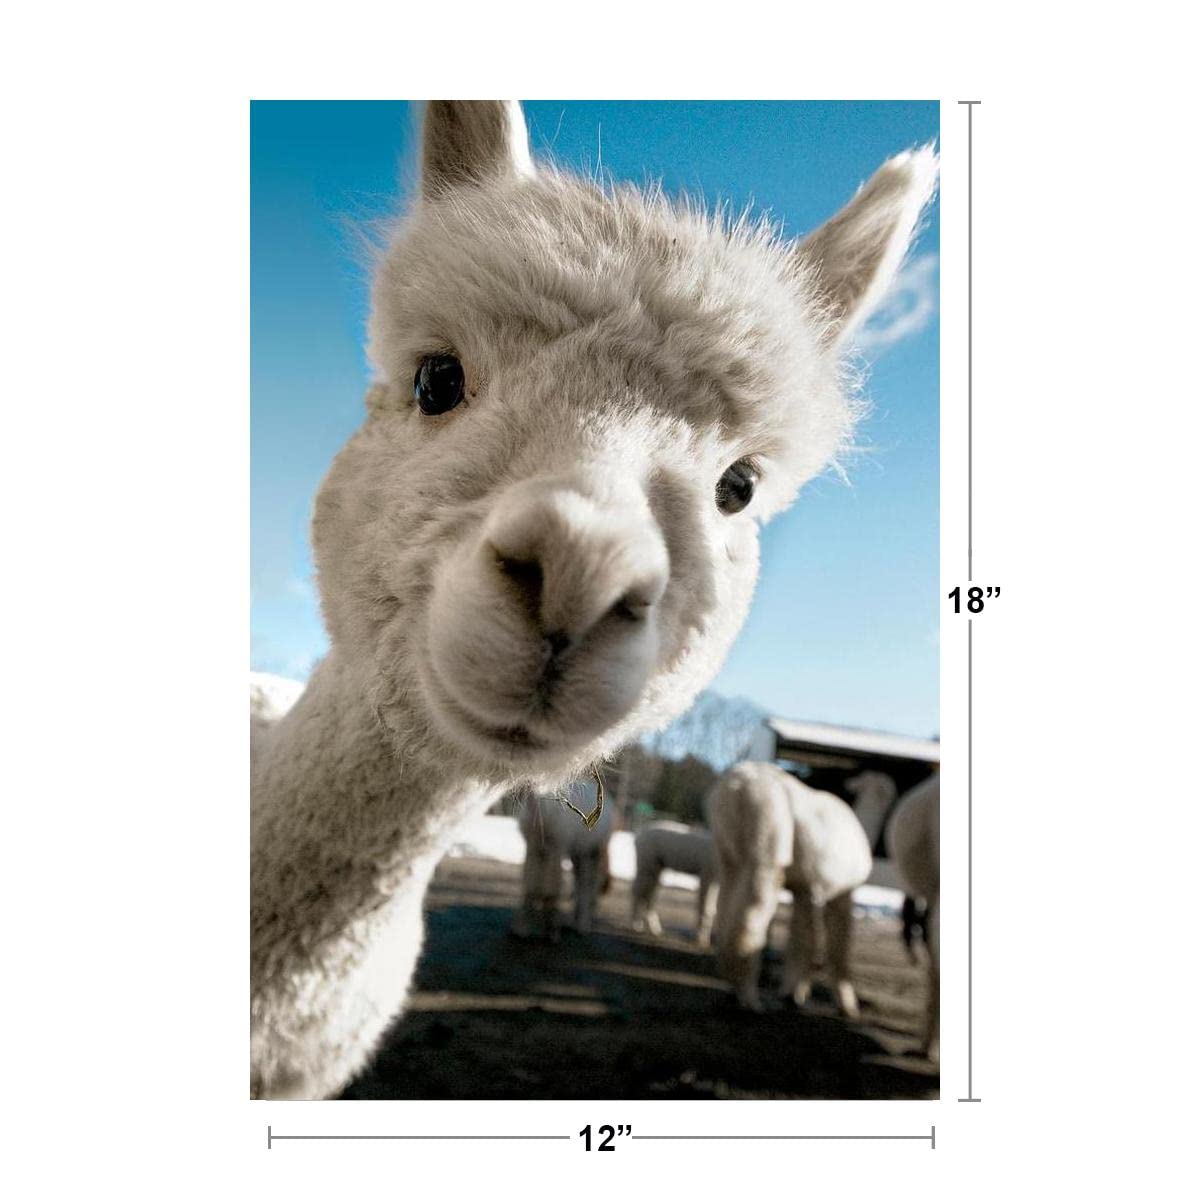 Alpaca Face Cute Baby Close Up View Animal Photography Face Funny Llama Photo Picture Zoo Adorable Cool Wall Decor Art Print Poster 12x18